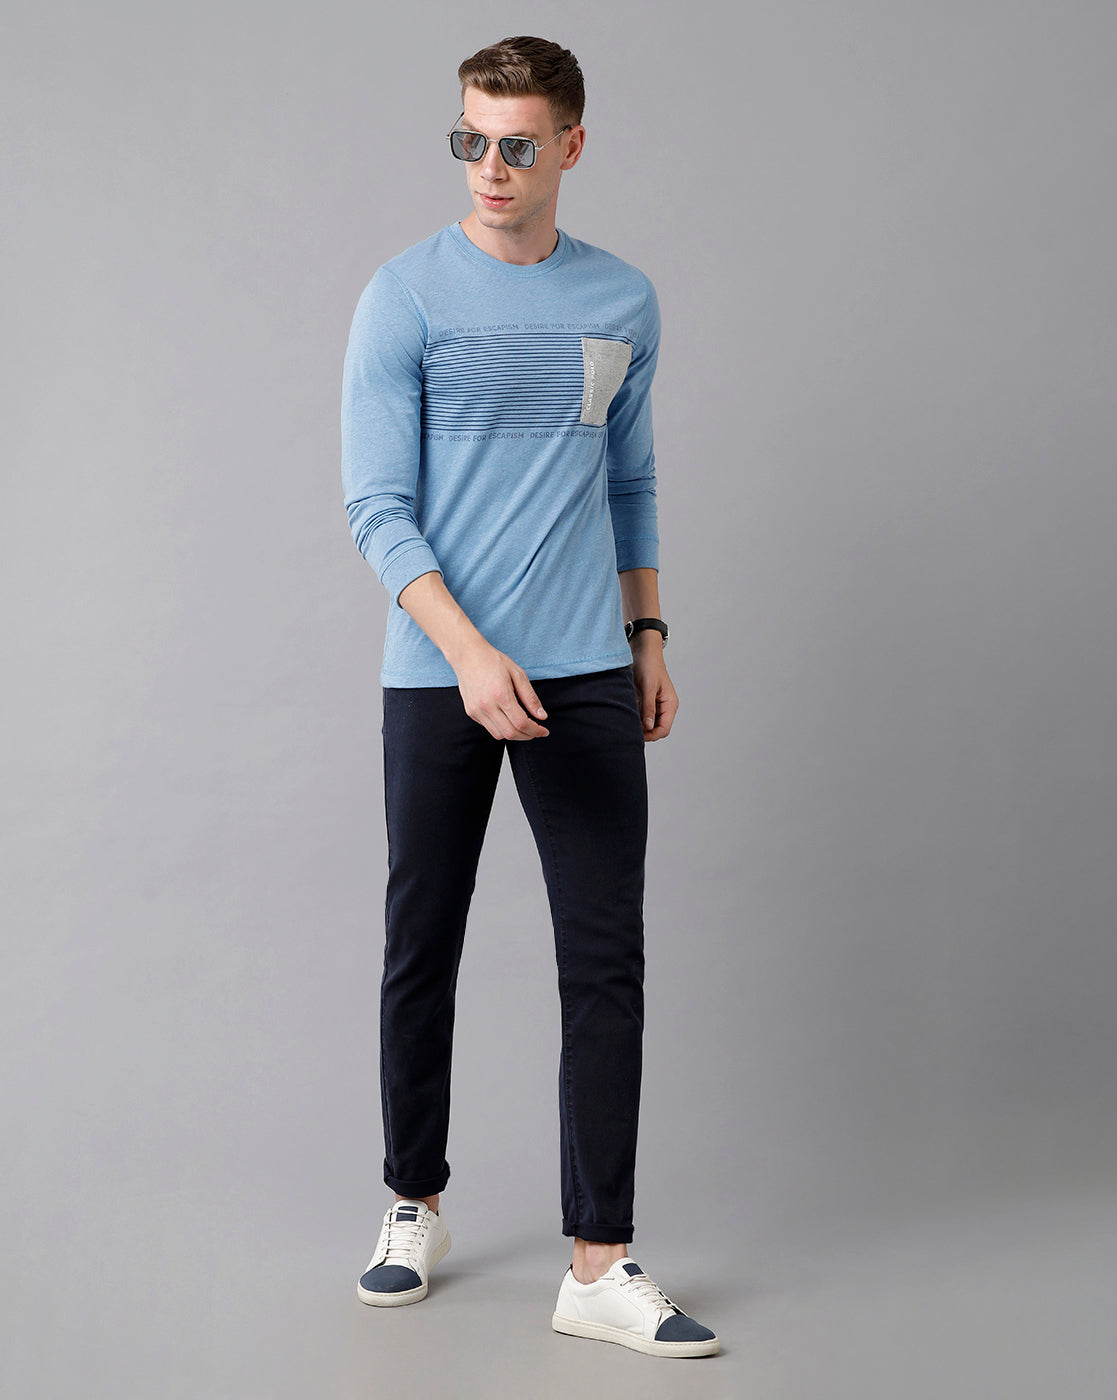 Classic Polo Men's Cotton Printed Full Sleeve Slim Fit Round Neck Blue Color T-Shirt | Baleno Fs - 478 B